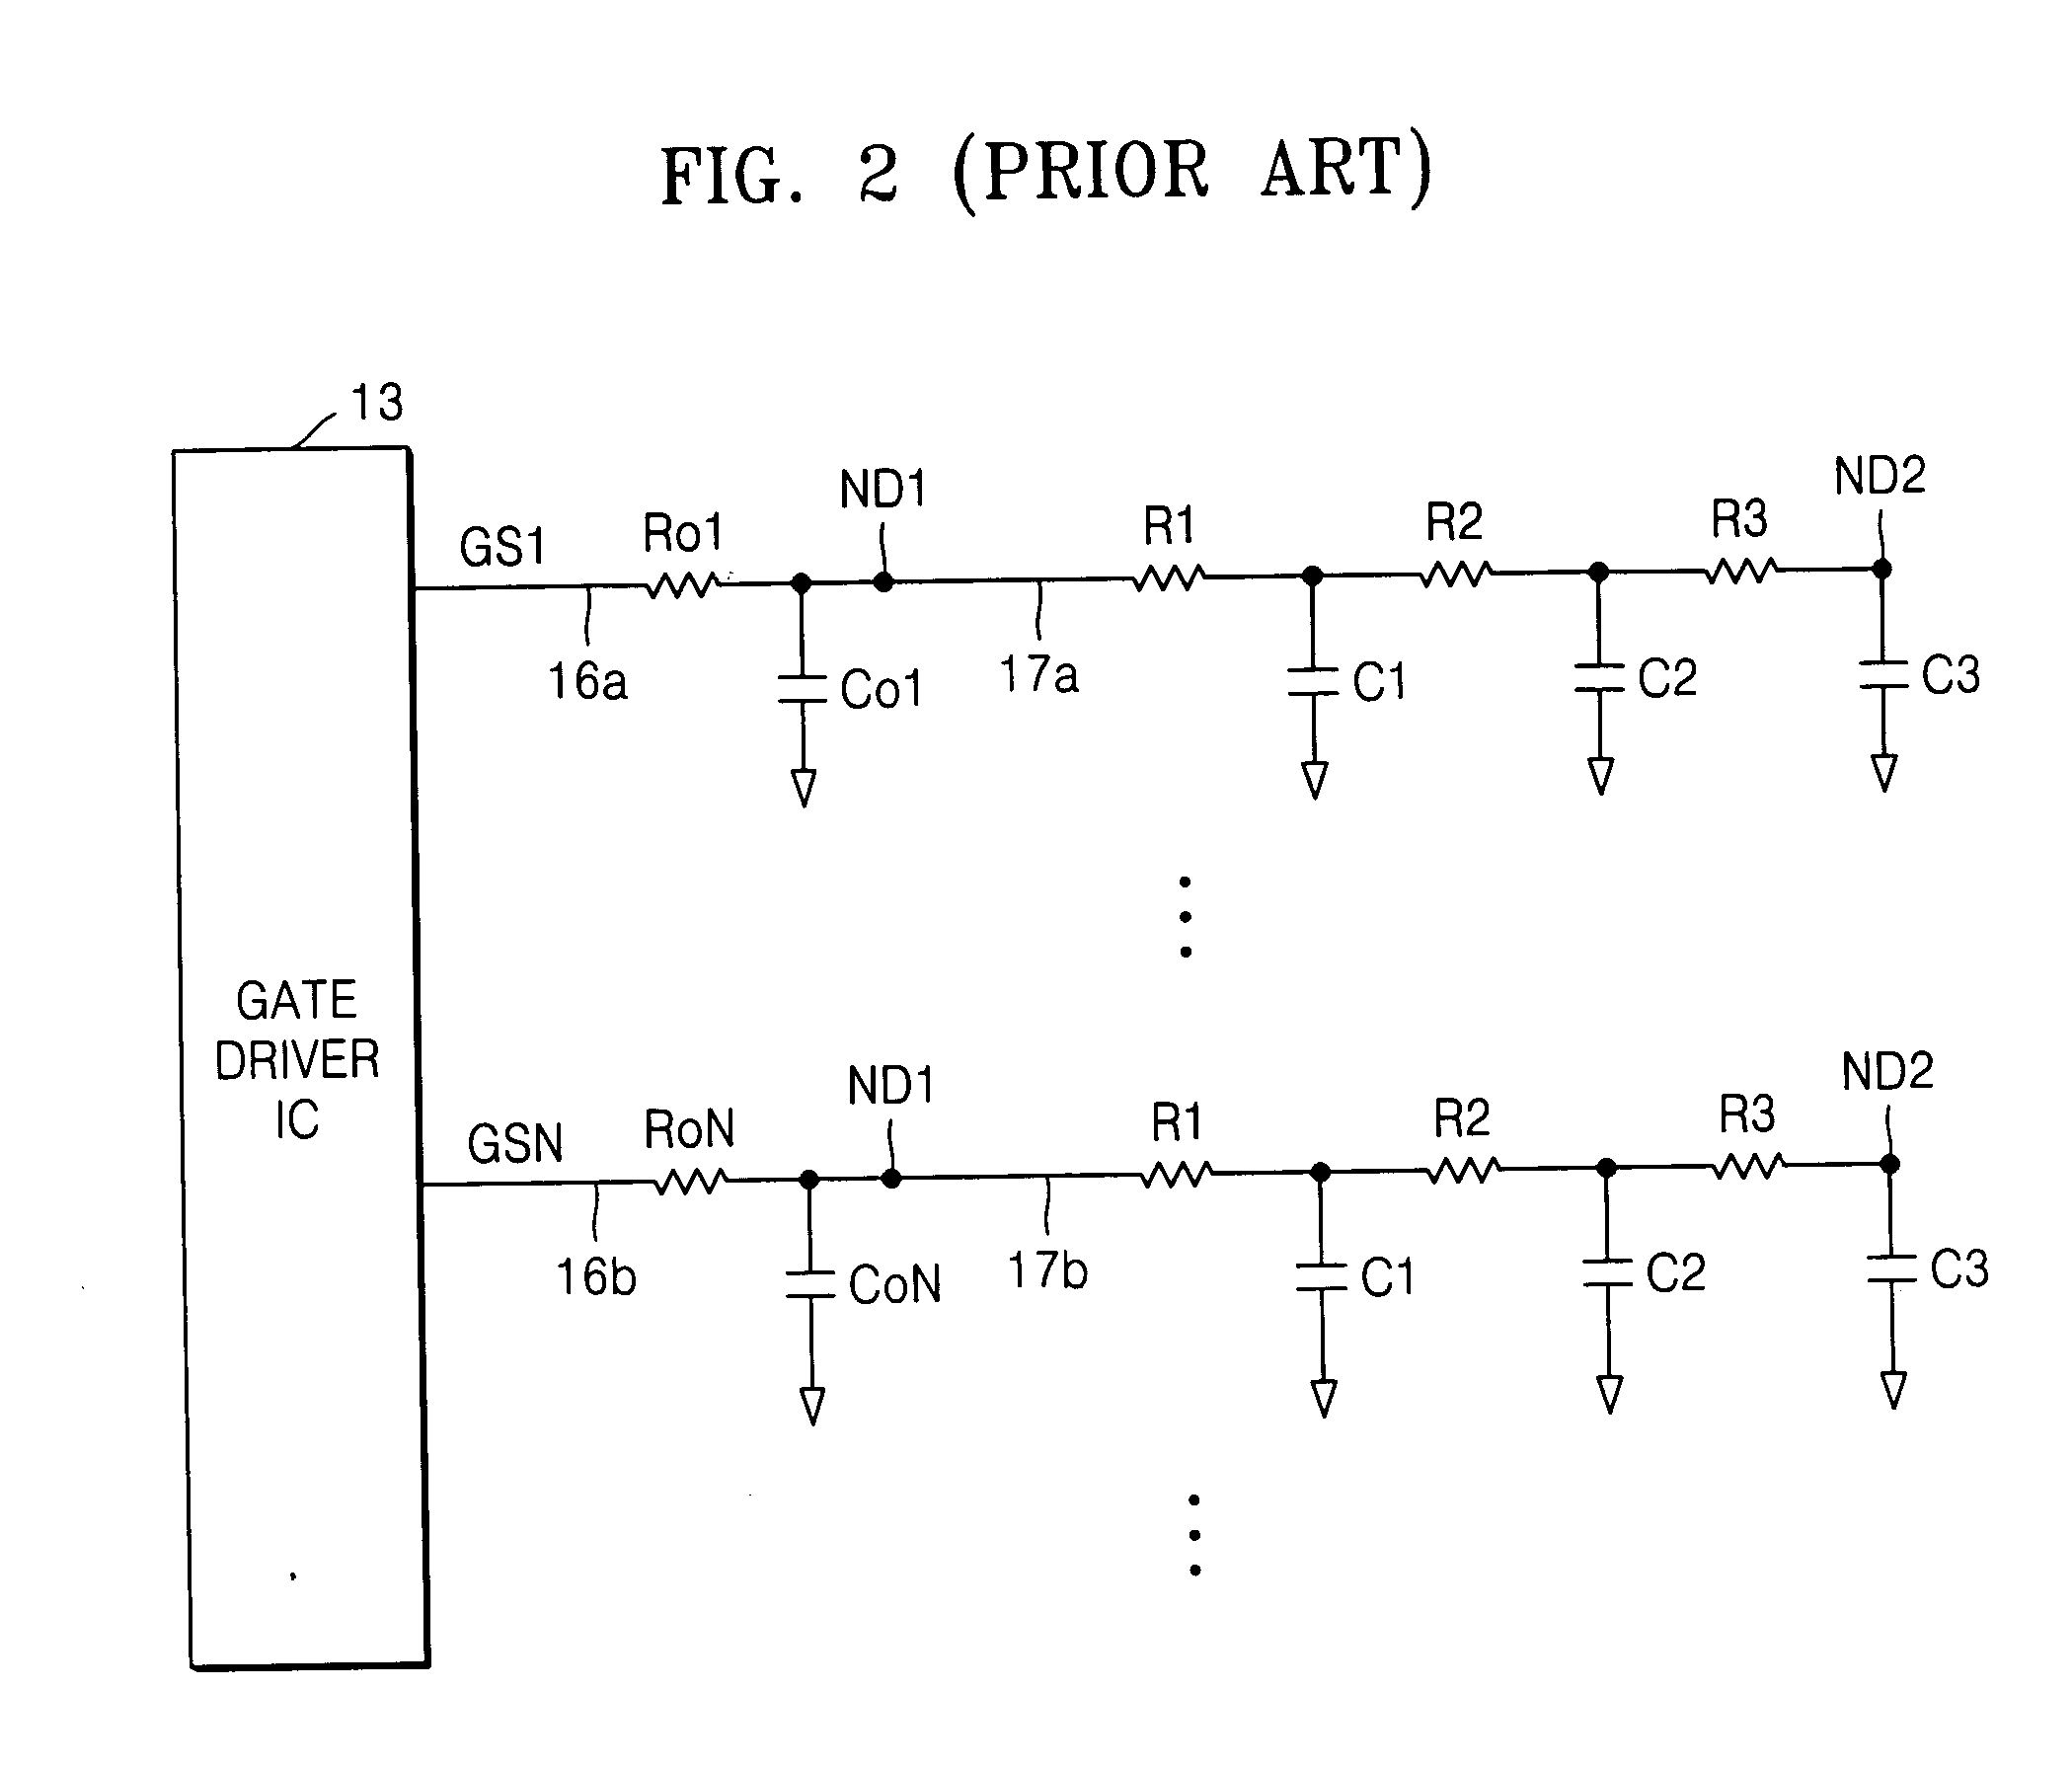 Gate line driver circuits for LCD displays